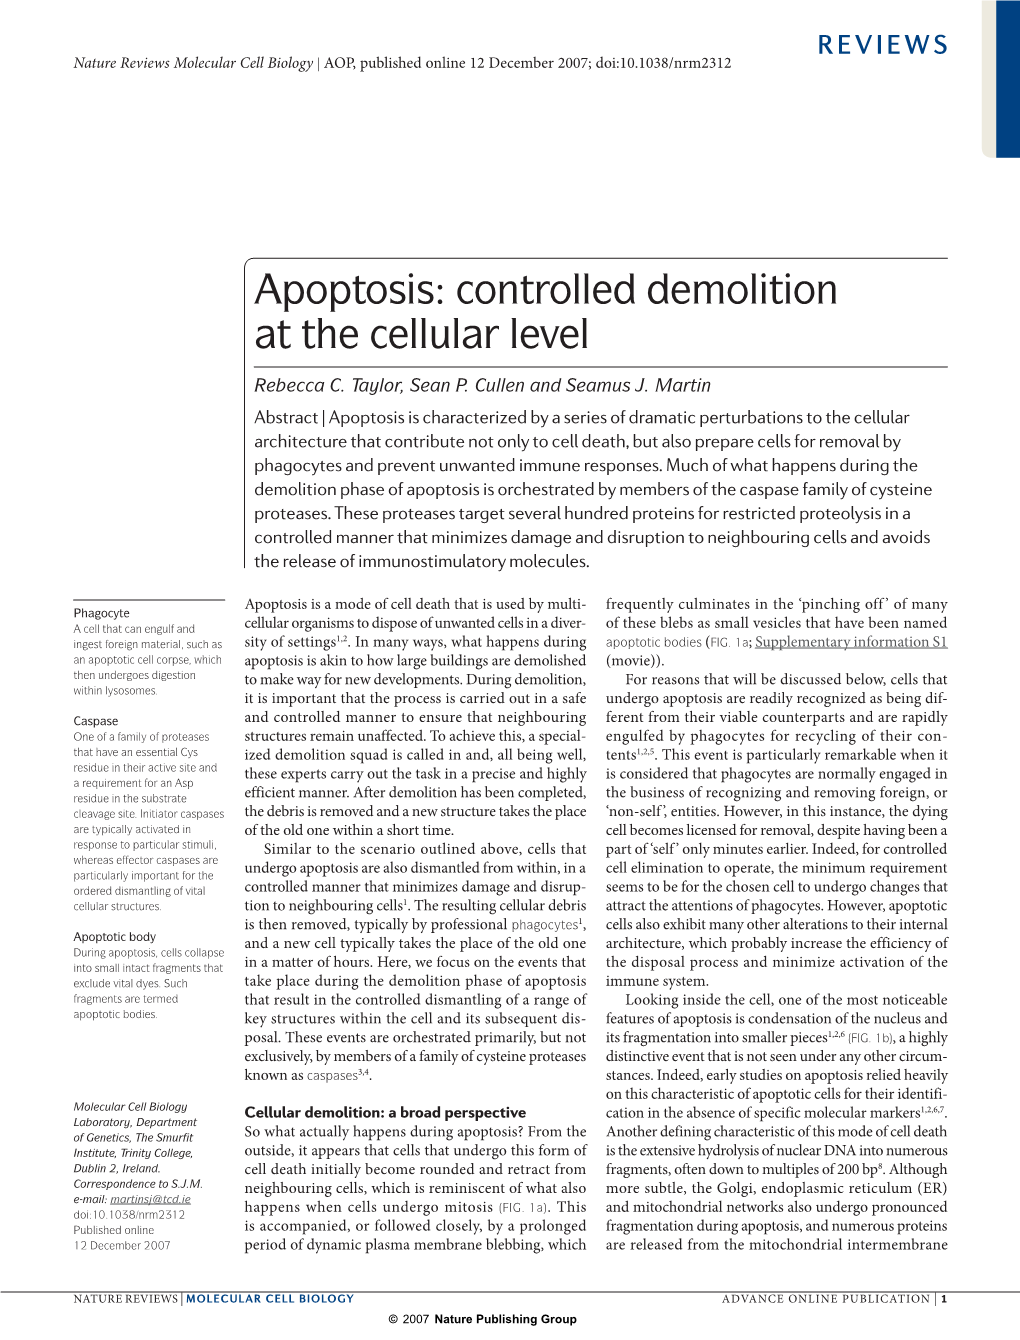 Apoptosis: Controlled Demolition at the Cellular Level